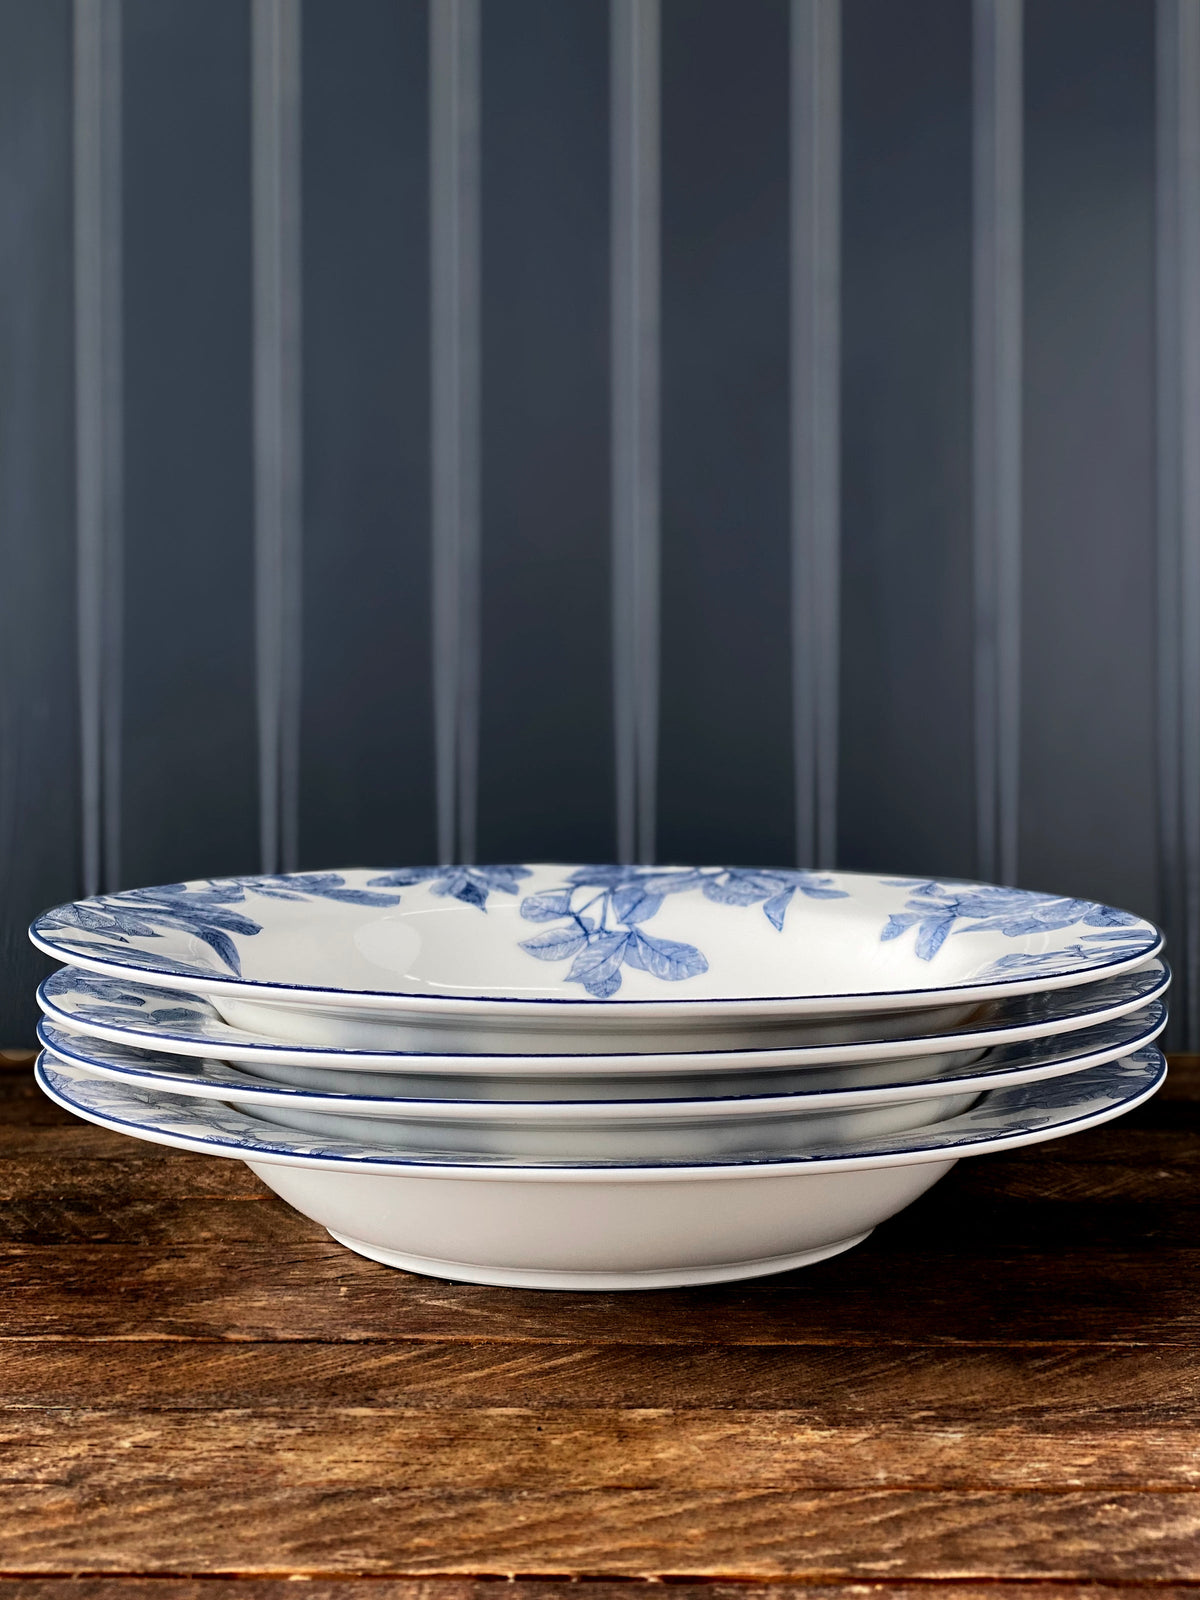 Four classic Arbor Rimmed Soup Bowls by Caskata Artisanal Home, made of high-fire porcelain, with blue floral patterns, are neatly stacked on a wooden surface against vertical wooden panels. These white ceramic bowls are also dishwasher safe for your convenience.